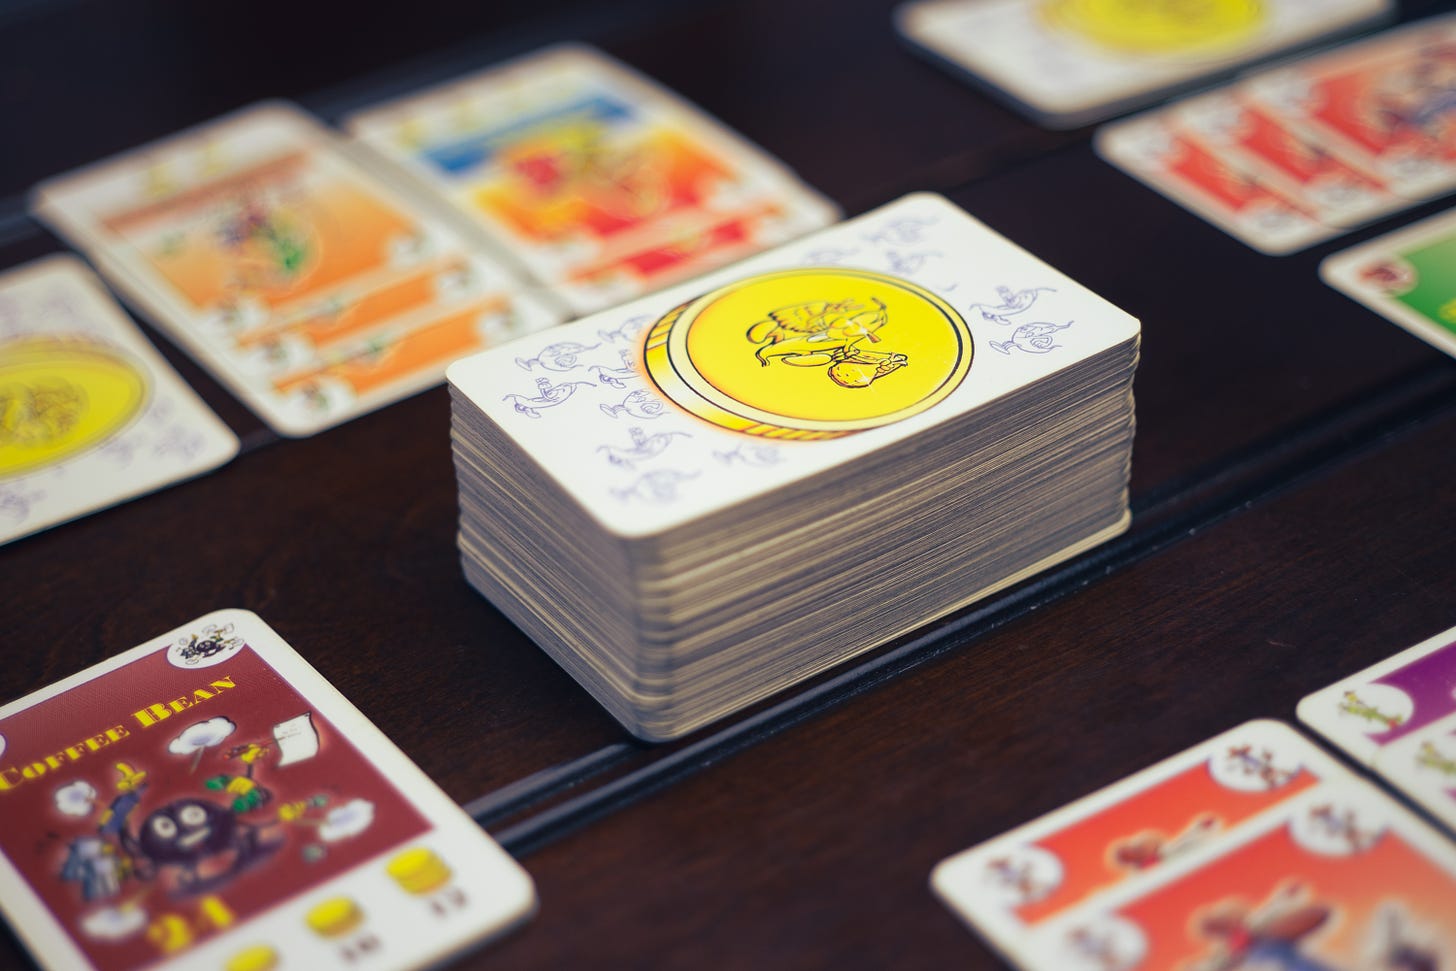 Cards from the game Bohnanza on a table. In focus is the coffee bean card.